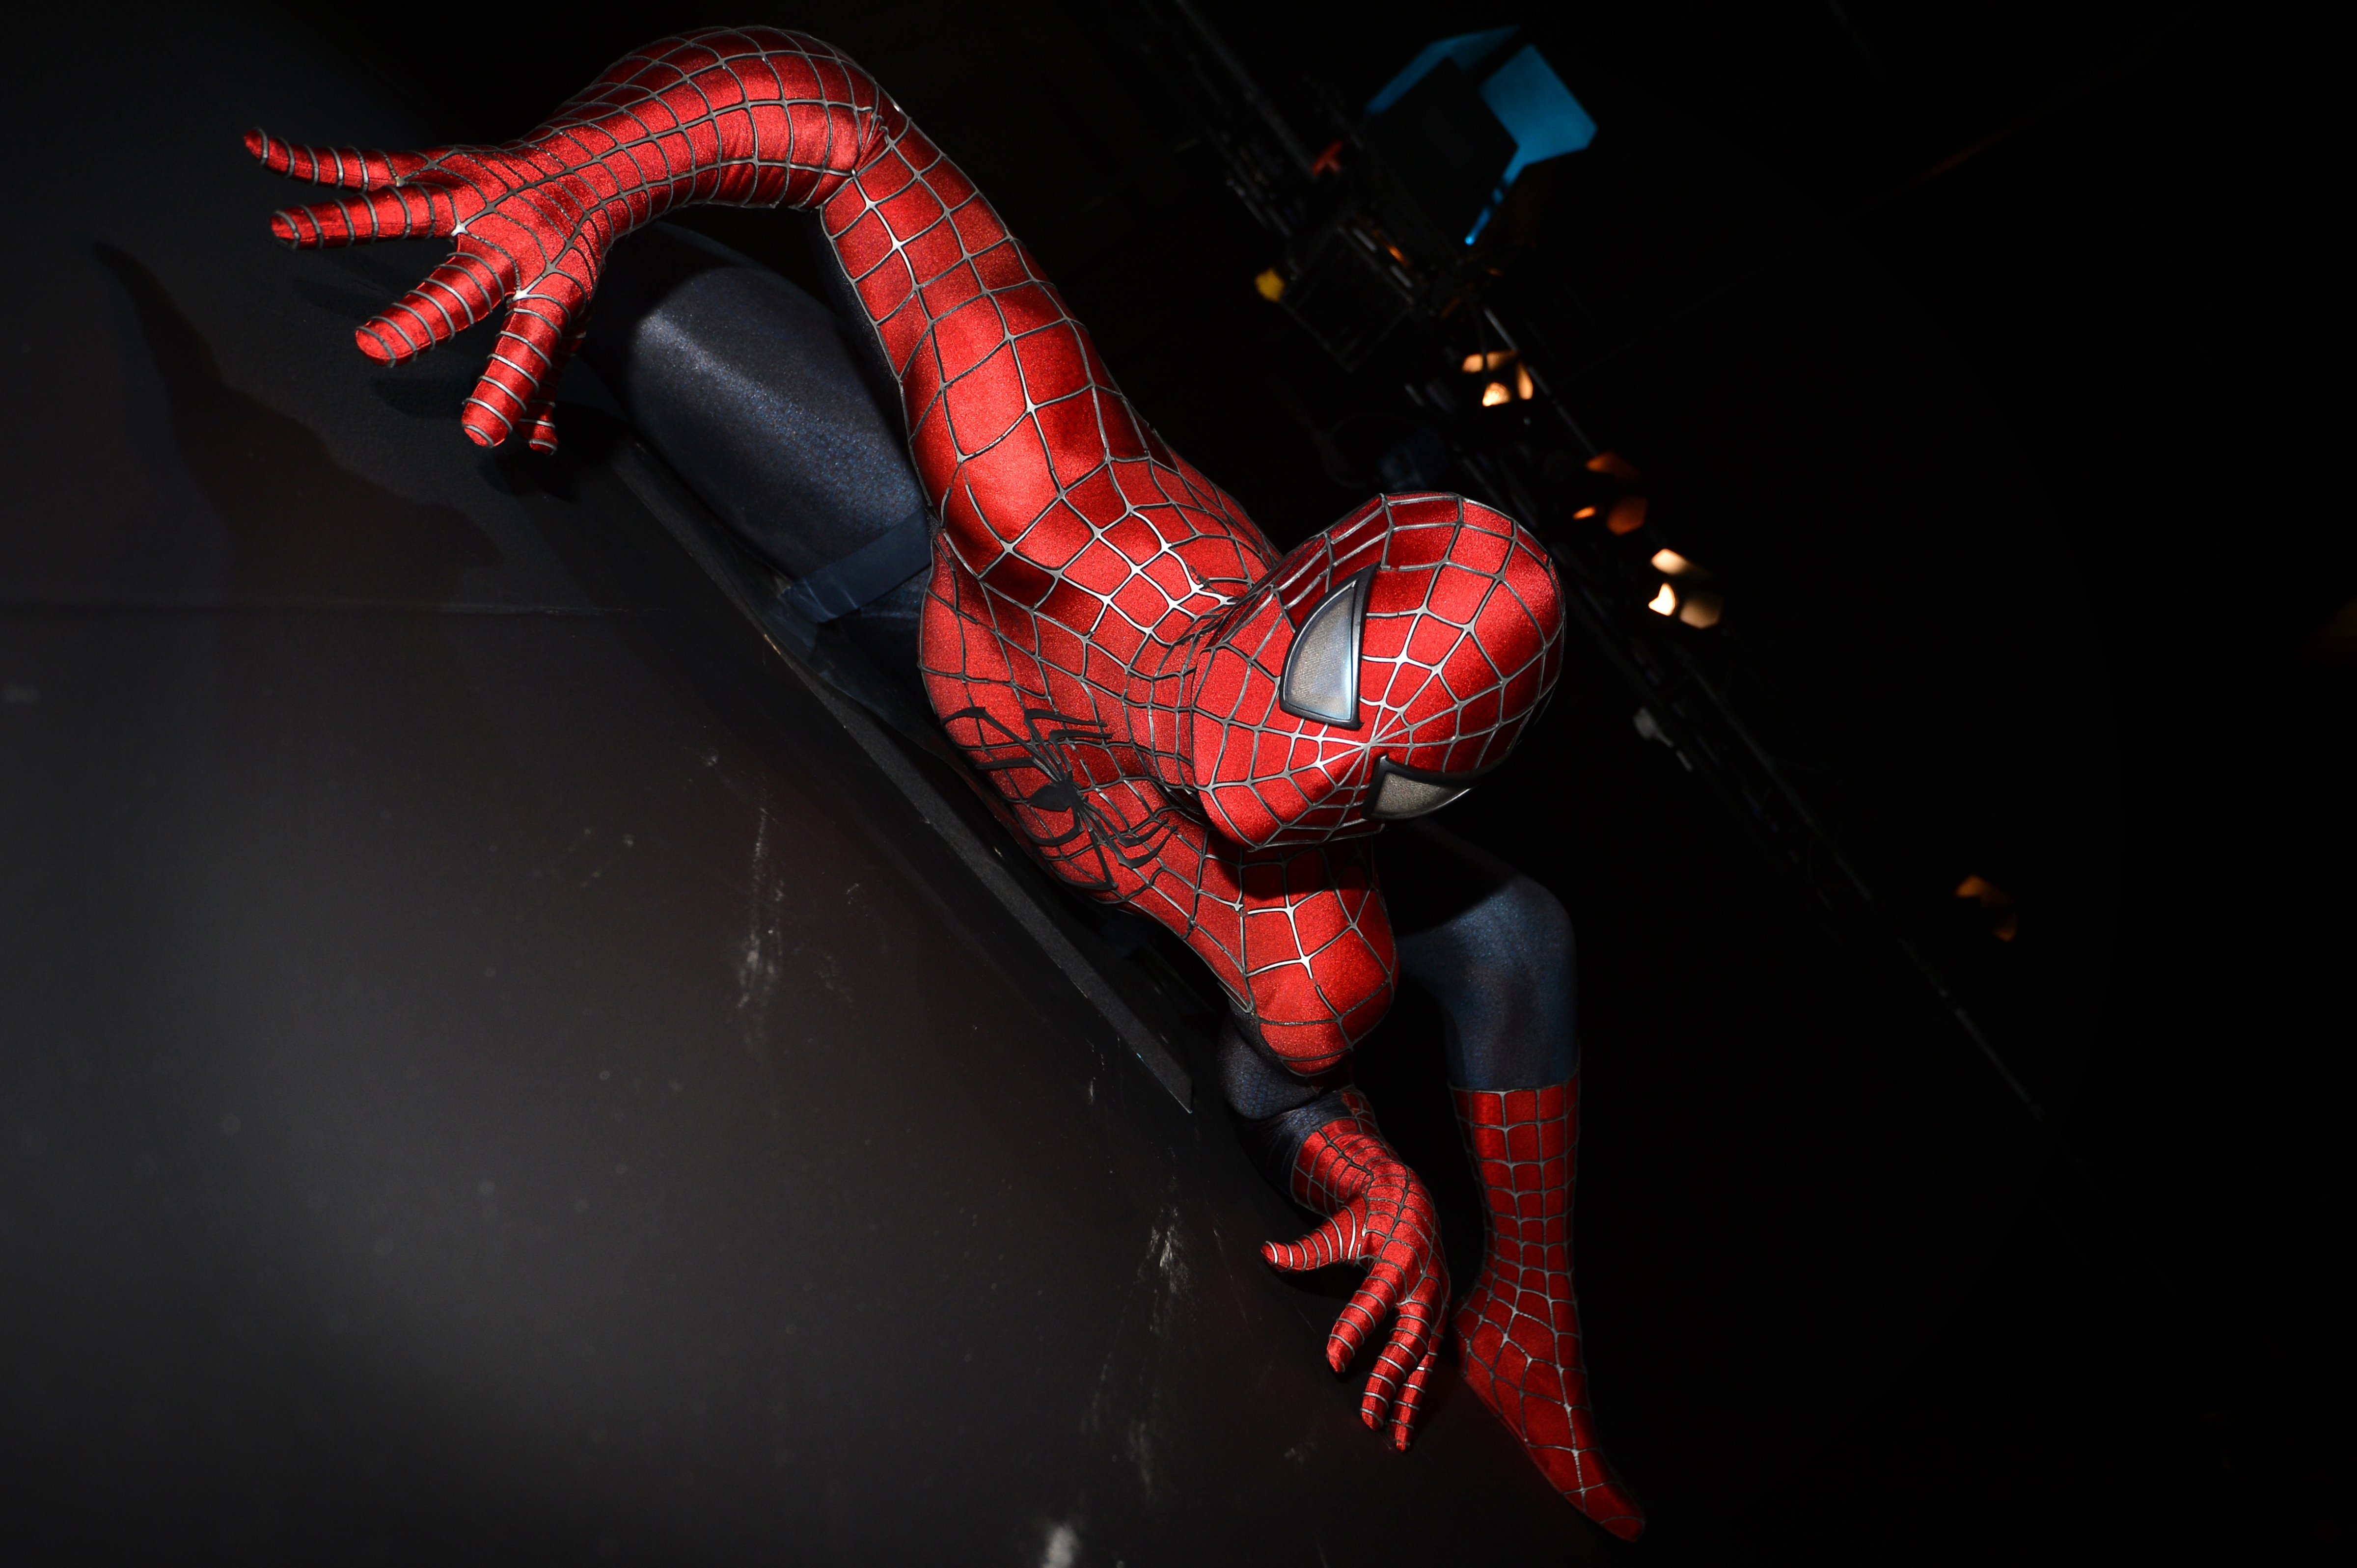 A costume worn by U.S. actor Tobey Maguire in the 2002 movie <i>Spider-Man</i> is displayed at the "Hollywood Costume" exhibition at the Victoria and Albert Museum in London on Oct. 17, 2012 (Ben Stansall—AFP/Getty Images)